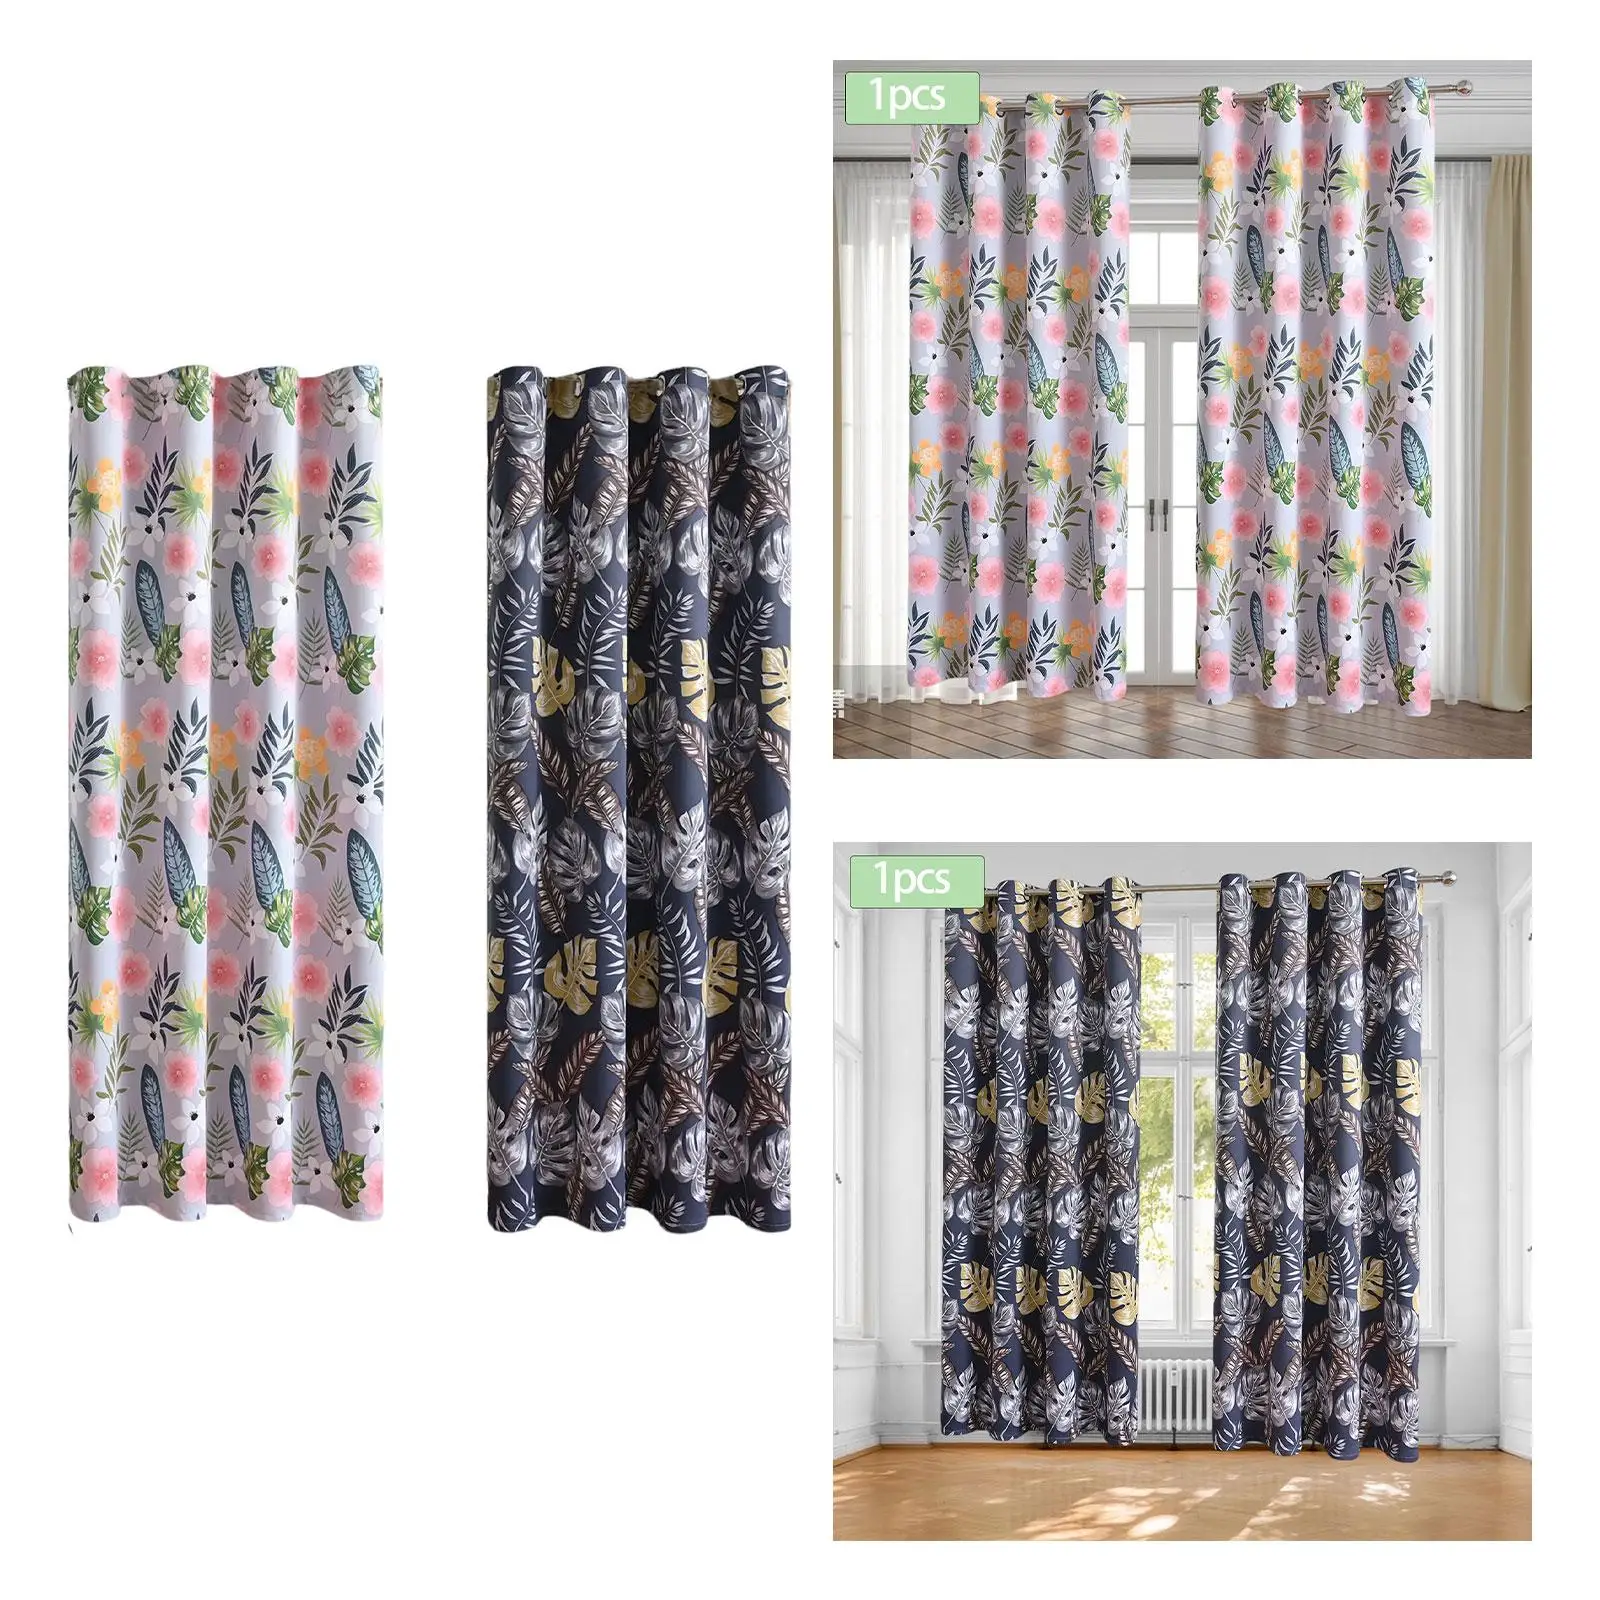 Fashion Window Drapes Sliding Door Curtain Drapes Grommet Curtains for Dining Room Living Room Hotel Restaurant Decoration